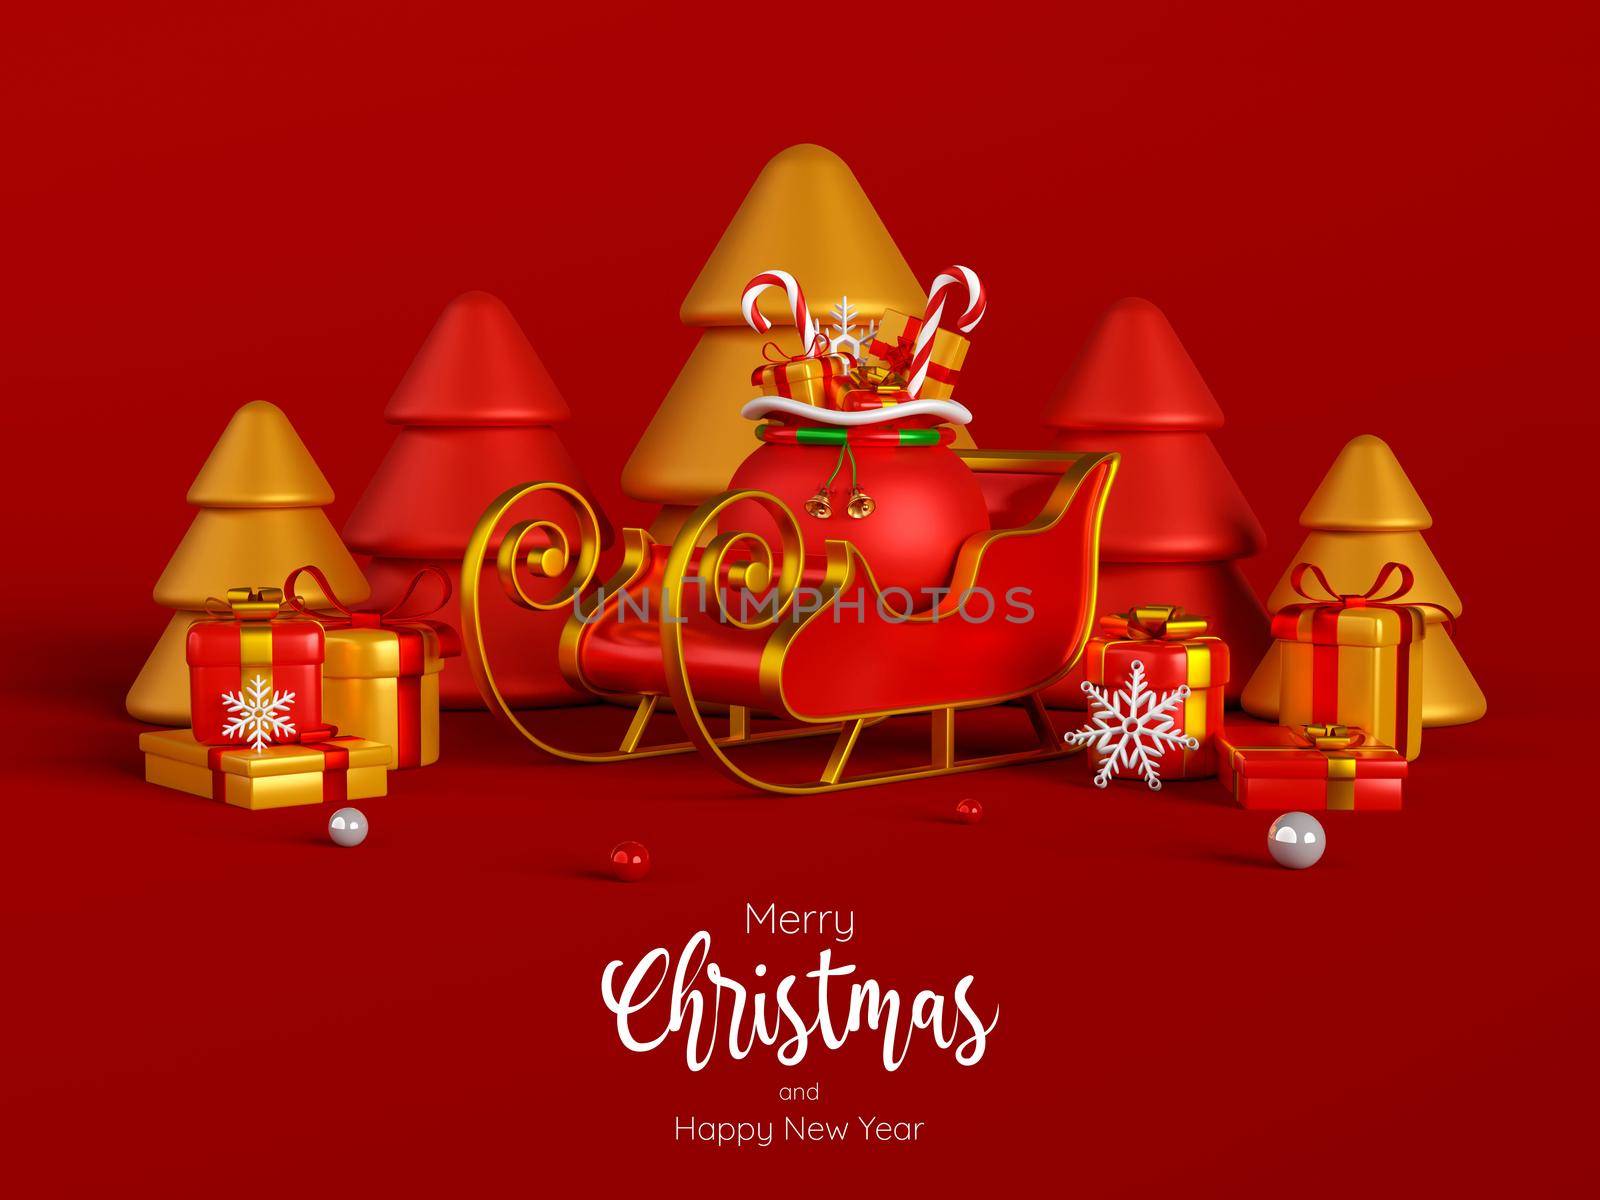 Sleigh and Christmas gifts with Xmas tree on a red background, 3d illustration by nutzchotwarut